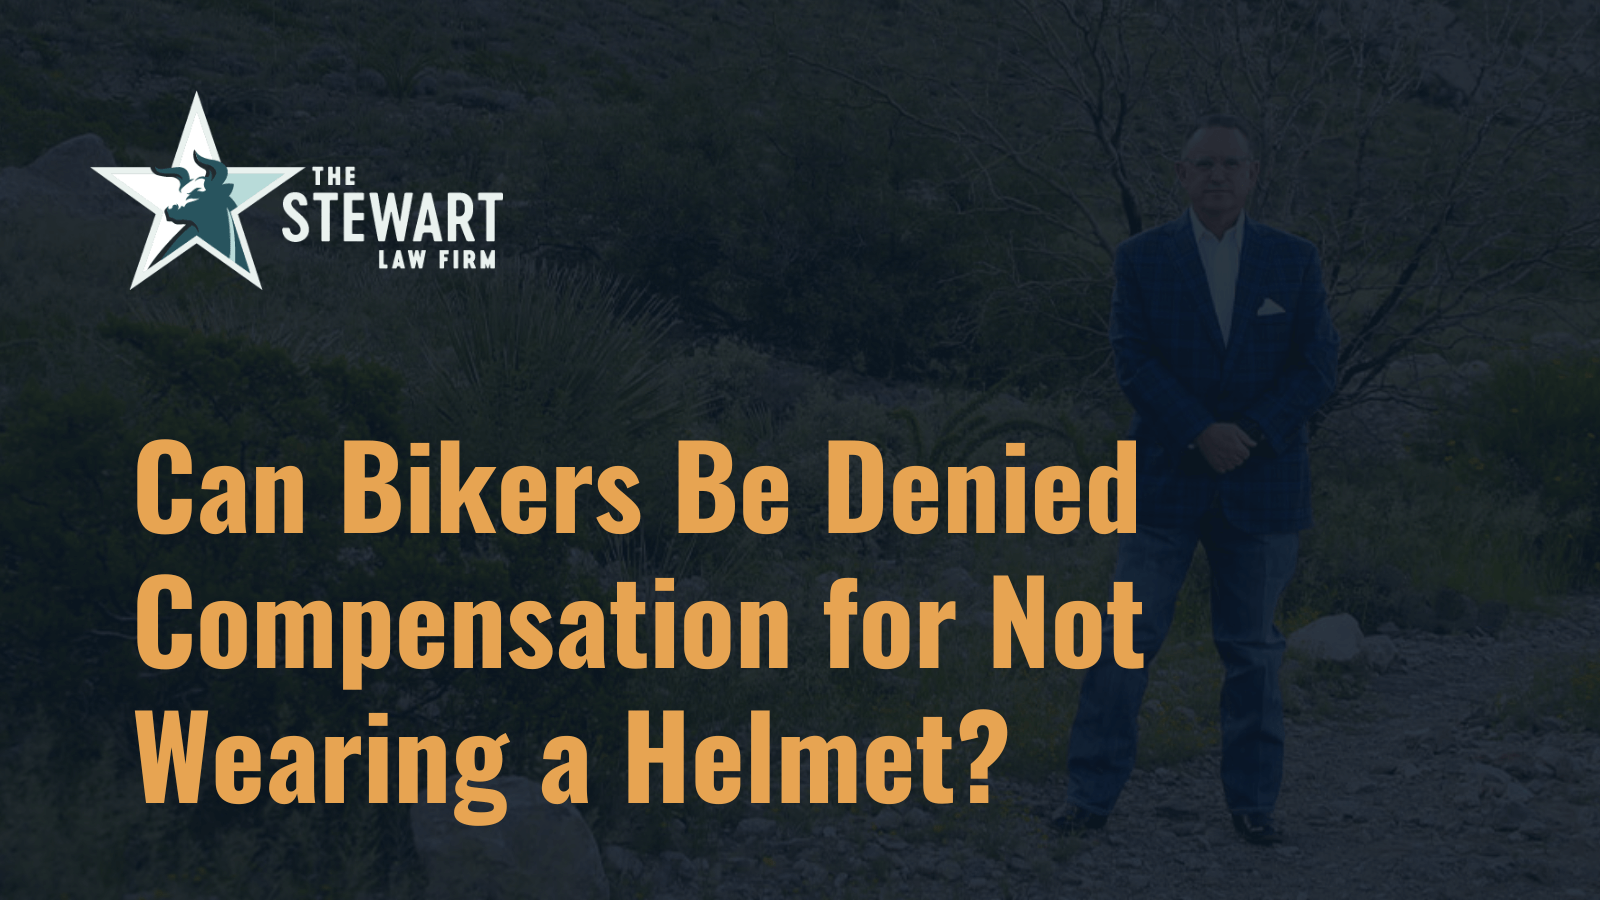 Can Bikers Be Denied Compensation for Not Wearing a Helmet?